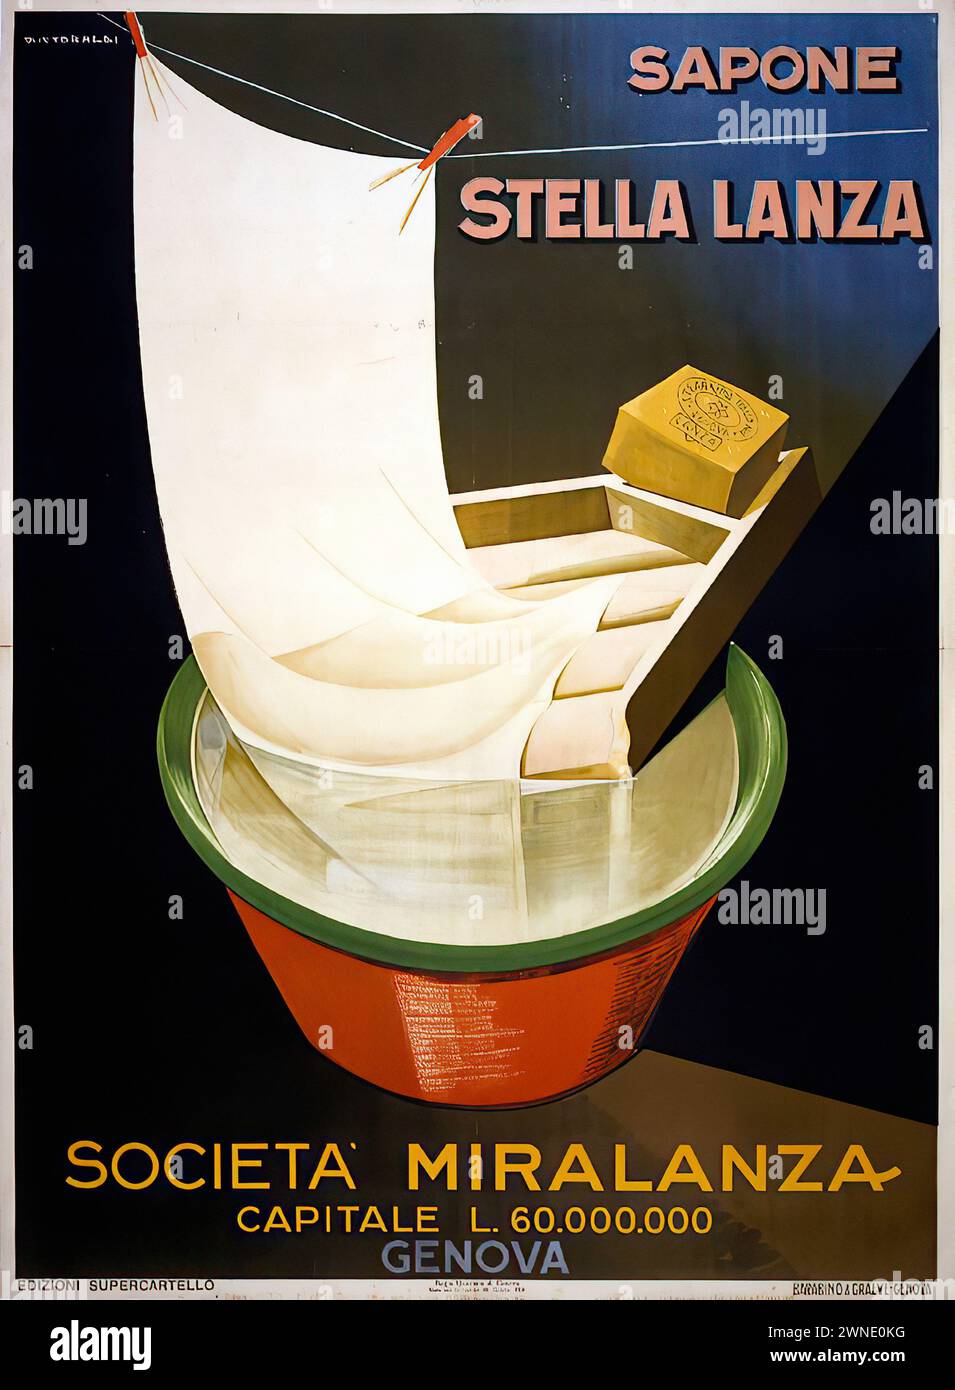 'SAPONE STELLA LANZA SOCIETA MIRALANZA CAPITALE L. 60.000.000 GENOVA' ['STELLA LANZA SOAP SOCIETY MIRALANZA CAPITAL L. 60,000,000 GENOA'] Vintage Italian Advertising depicting an oversized bar of soap breaking through paper, above a green and red container. The background is dark blue, and the text is in bold, uppercase letters. The style is reminiscent of Italian Futurism with its bold colors and dynamic composition Stock Photo